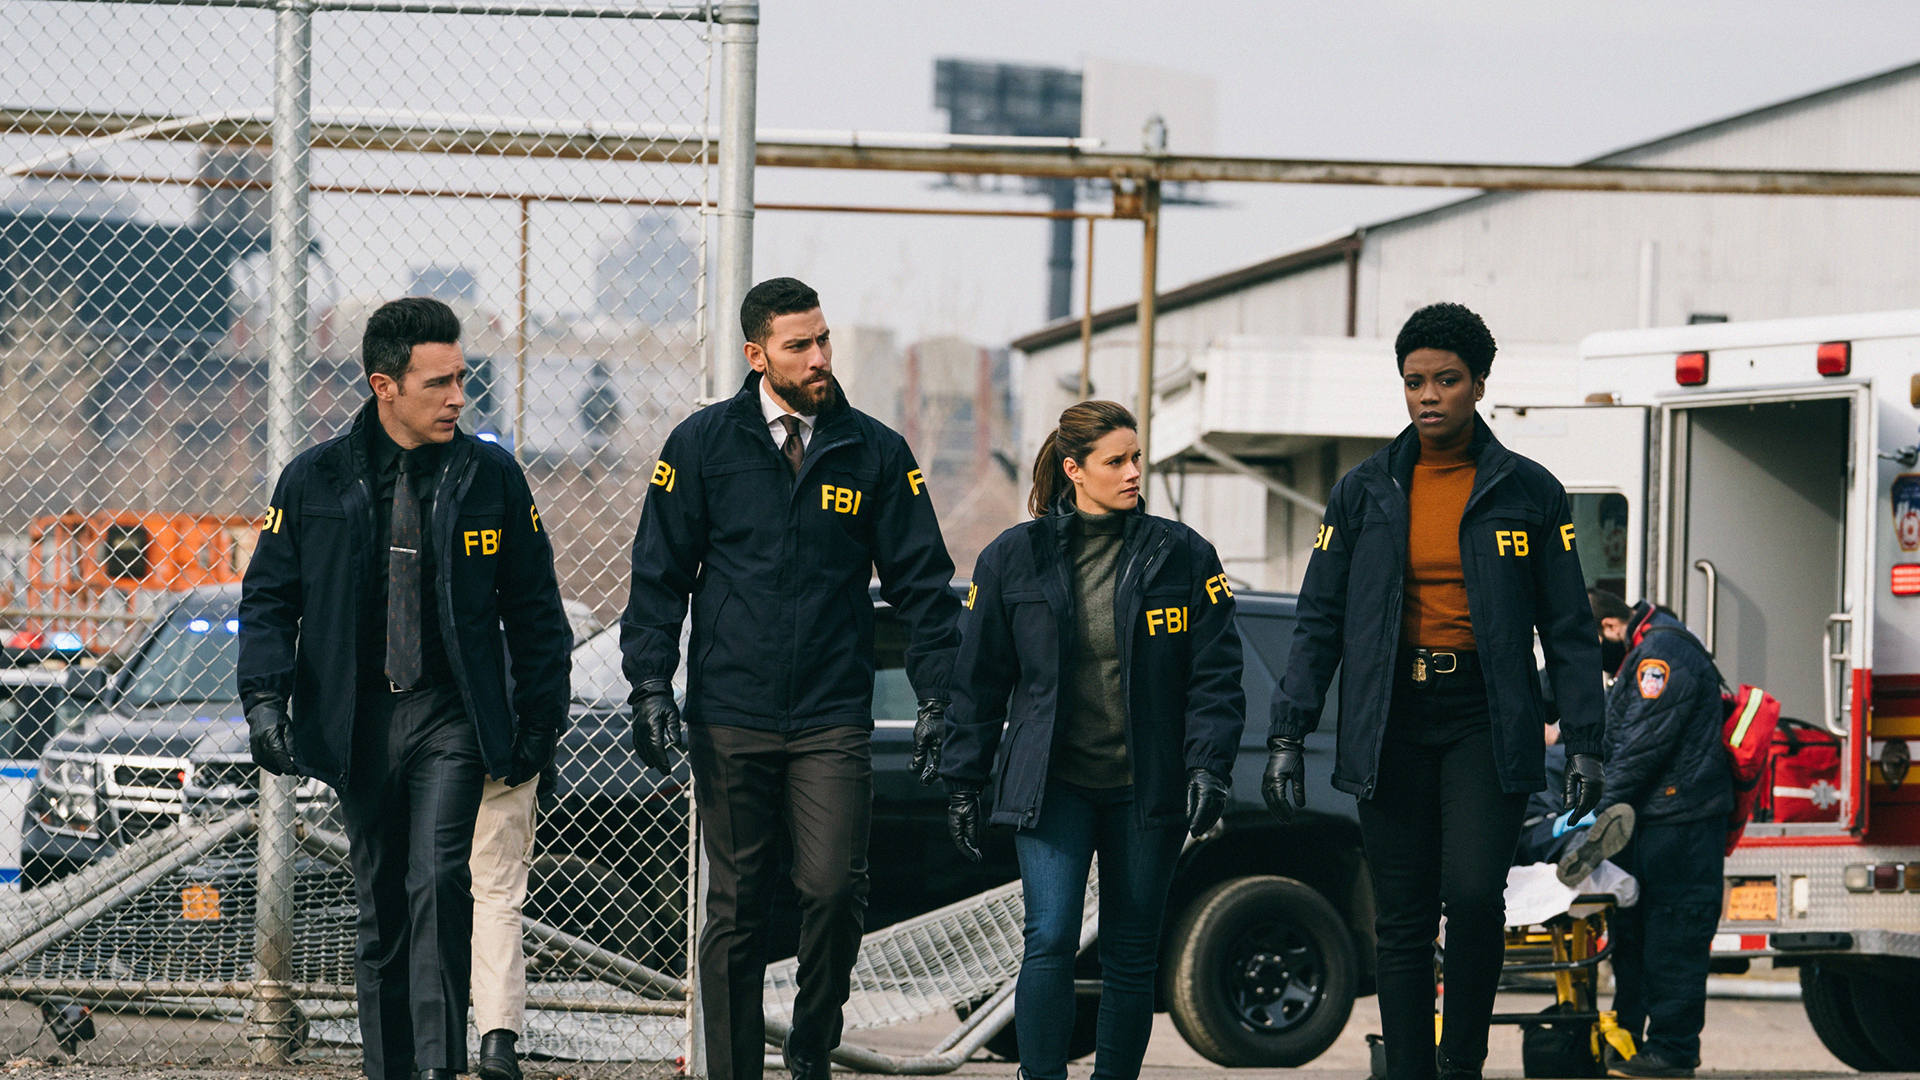 FBI season 6, Release date speculation and latest news